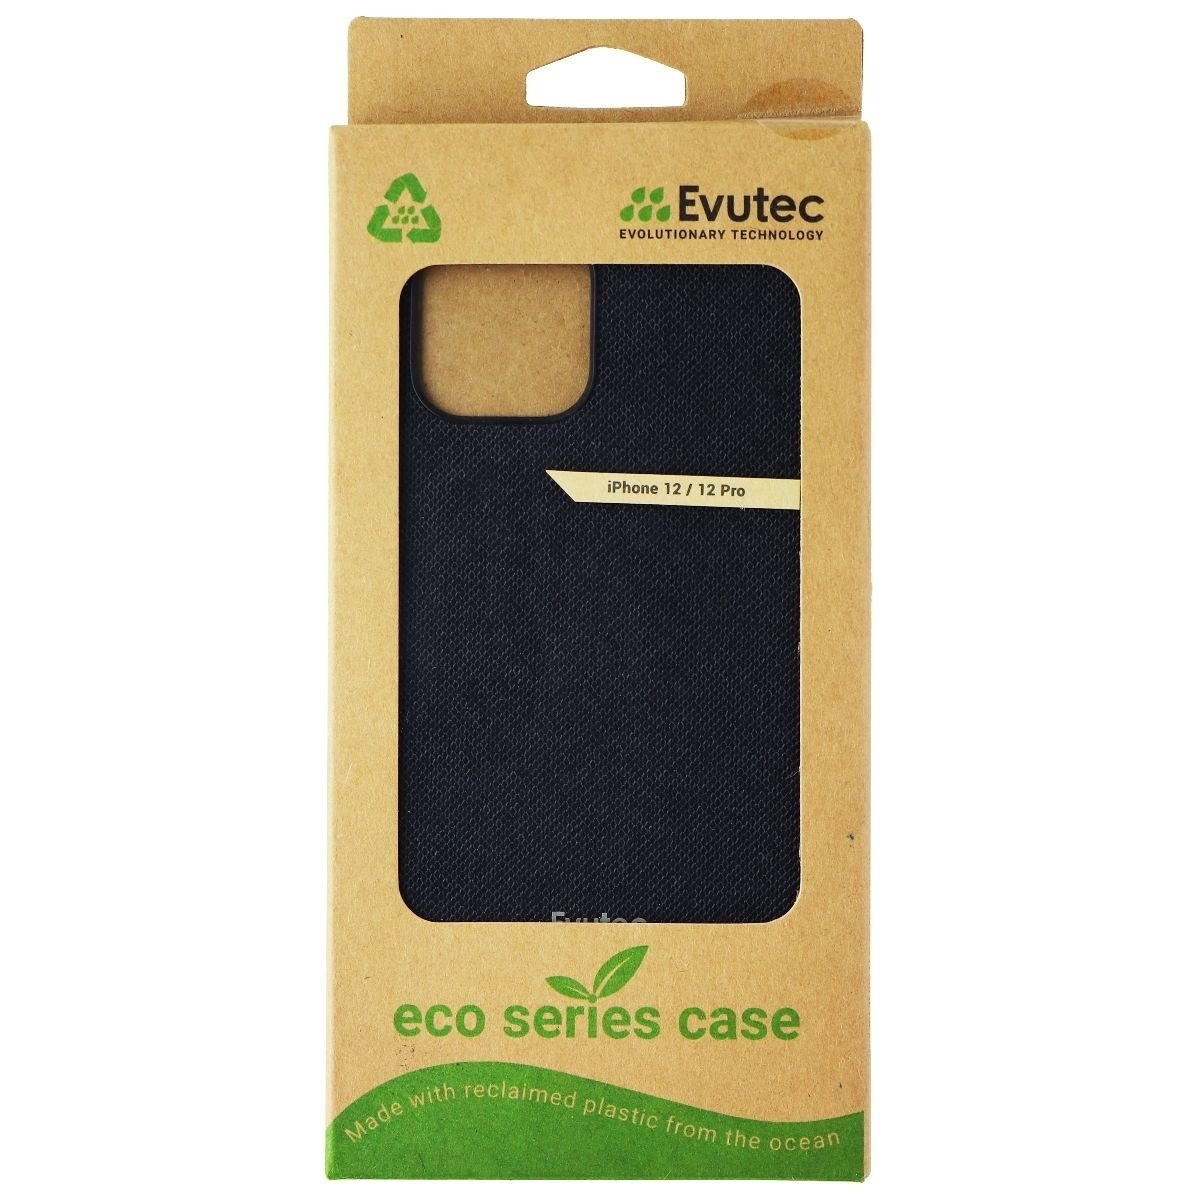 Evutec Eco Series Fabric Case For Apple IPhone 12 And 12 Pro - Black